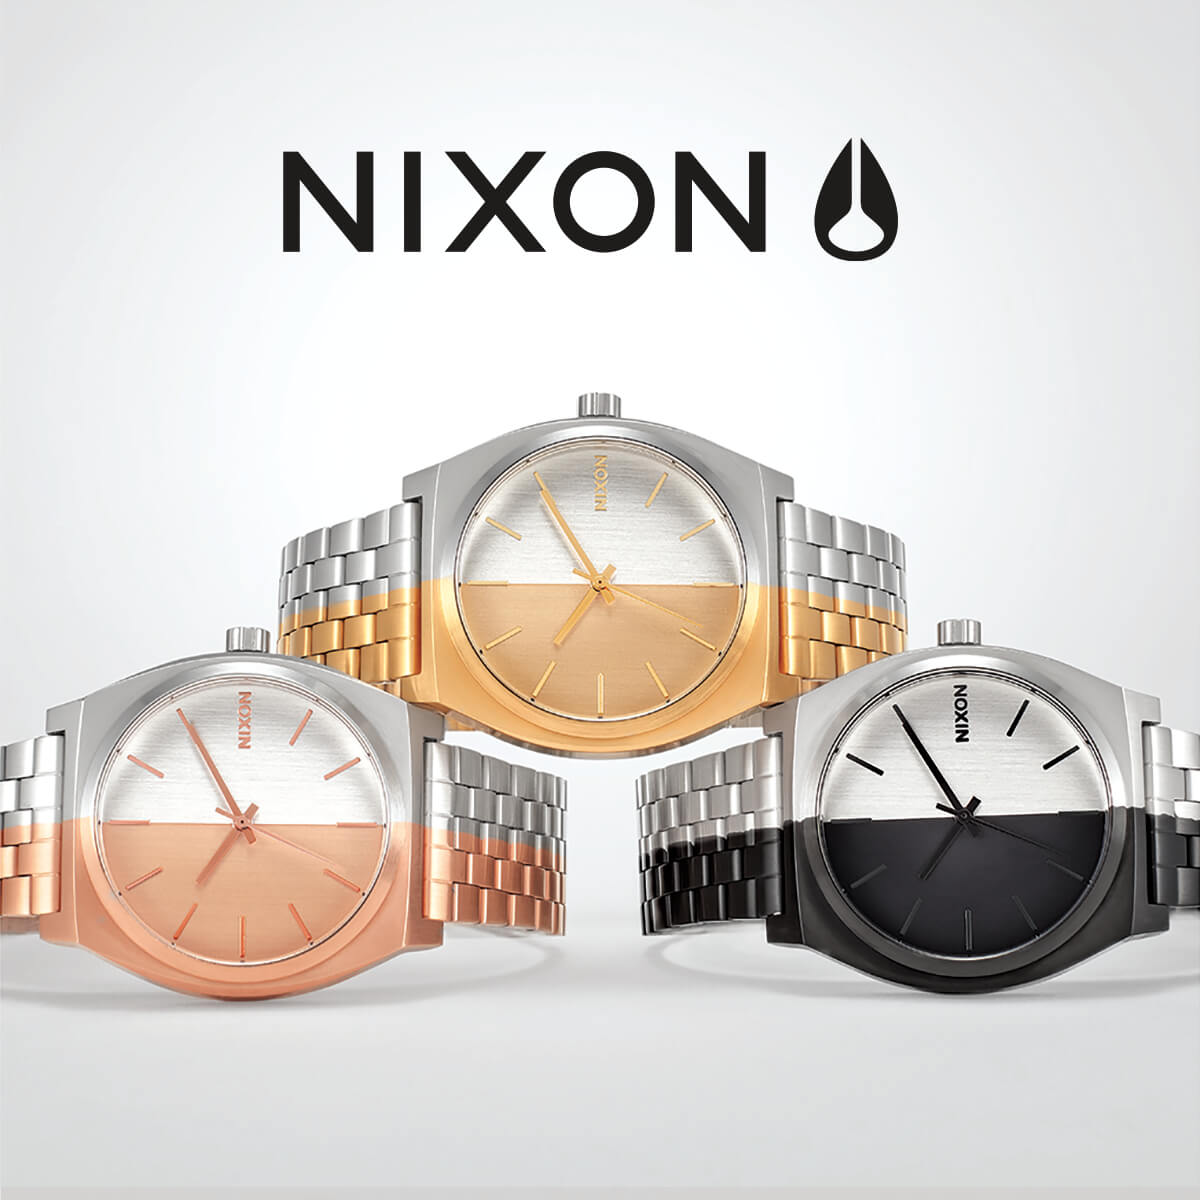 NEW ARRIVAL NIXON WATCHES MAKE THE PERFECT GIFT